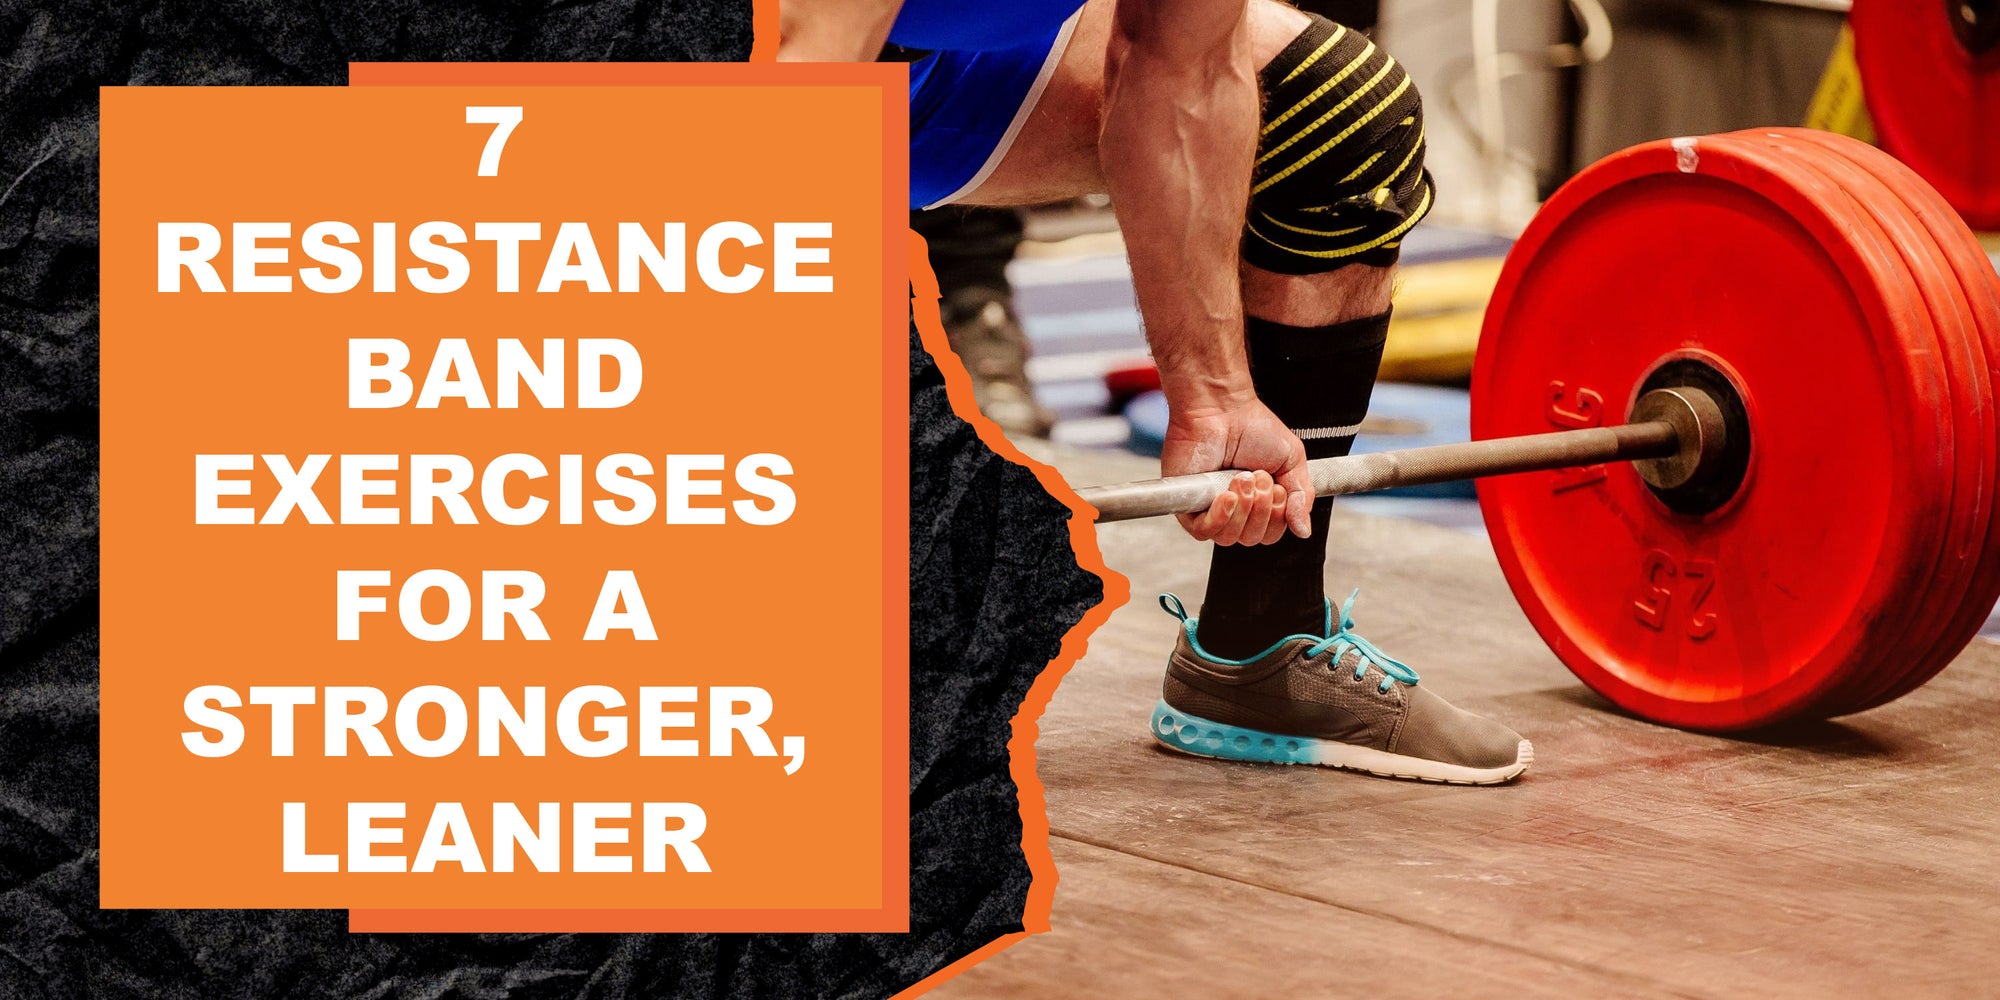 7 Resistance Band Exercises for a Stronger, Leaner Physique